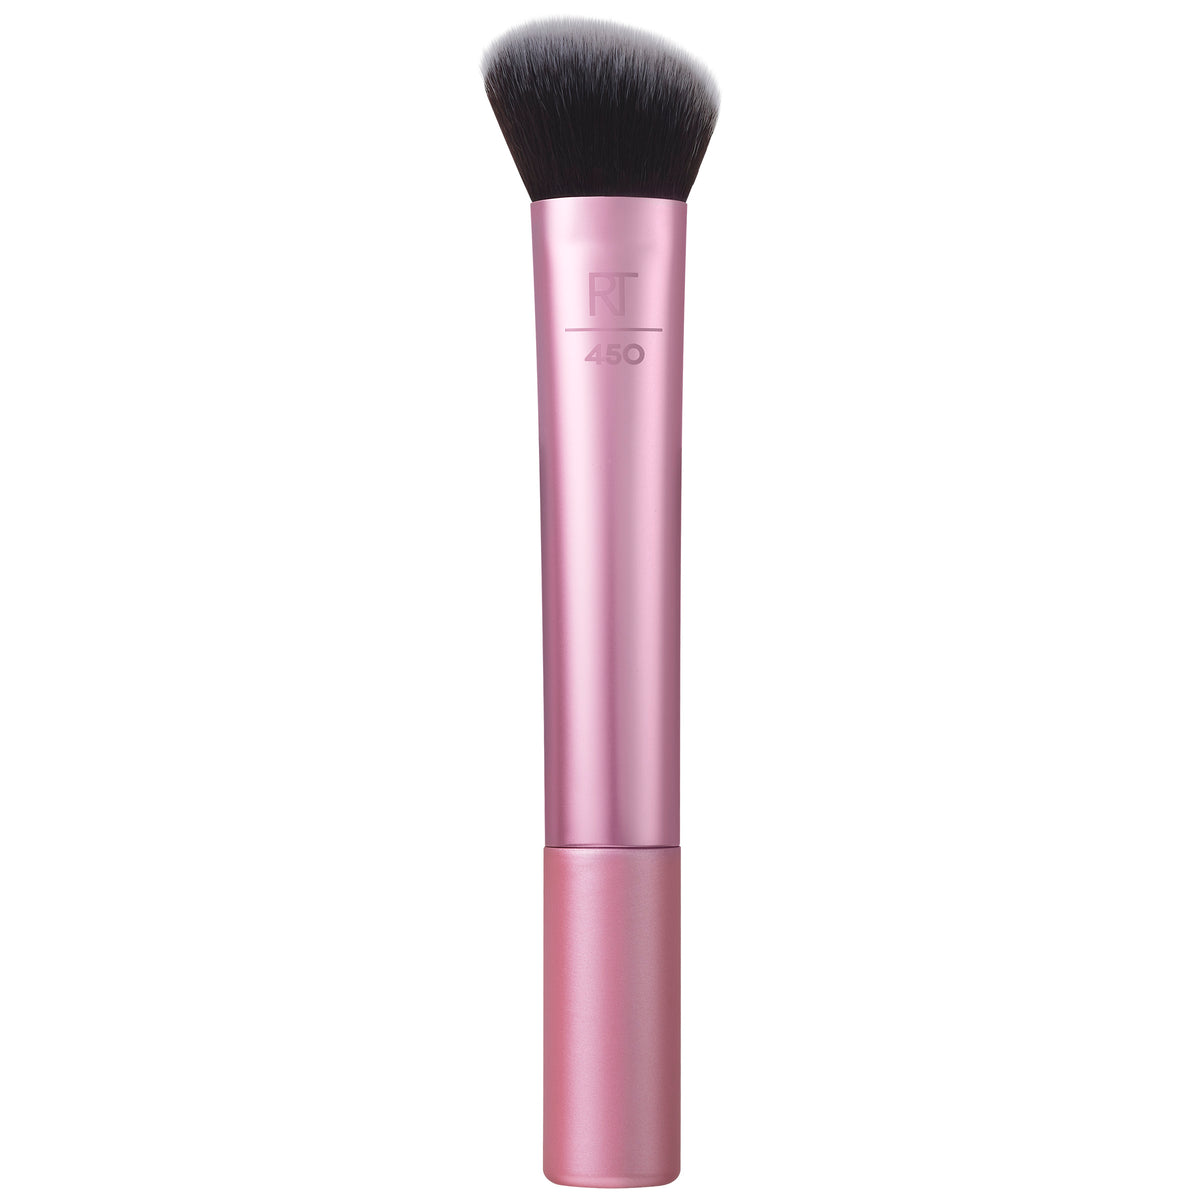 Real Techniques Soft Sculpting Makeup Brush, For Cream & Liquid Contour,  Contouring Face Brush, Natural Finish, Accentuated Facial Features, Pink, 1  Count